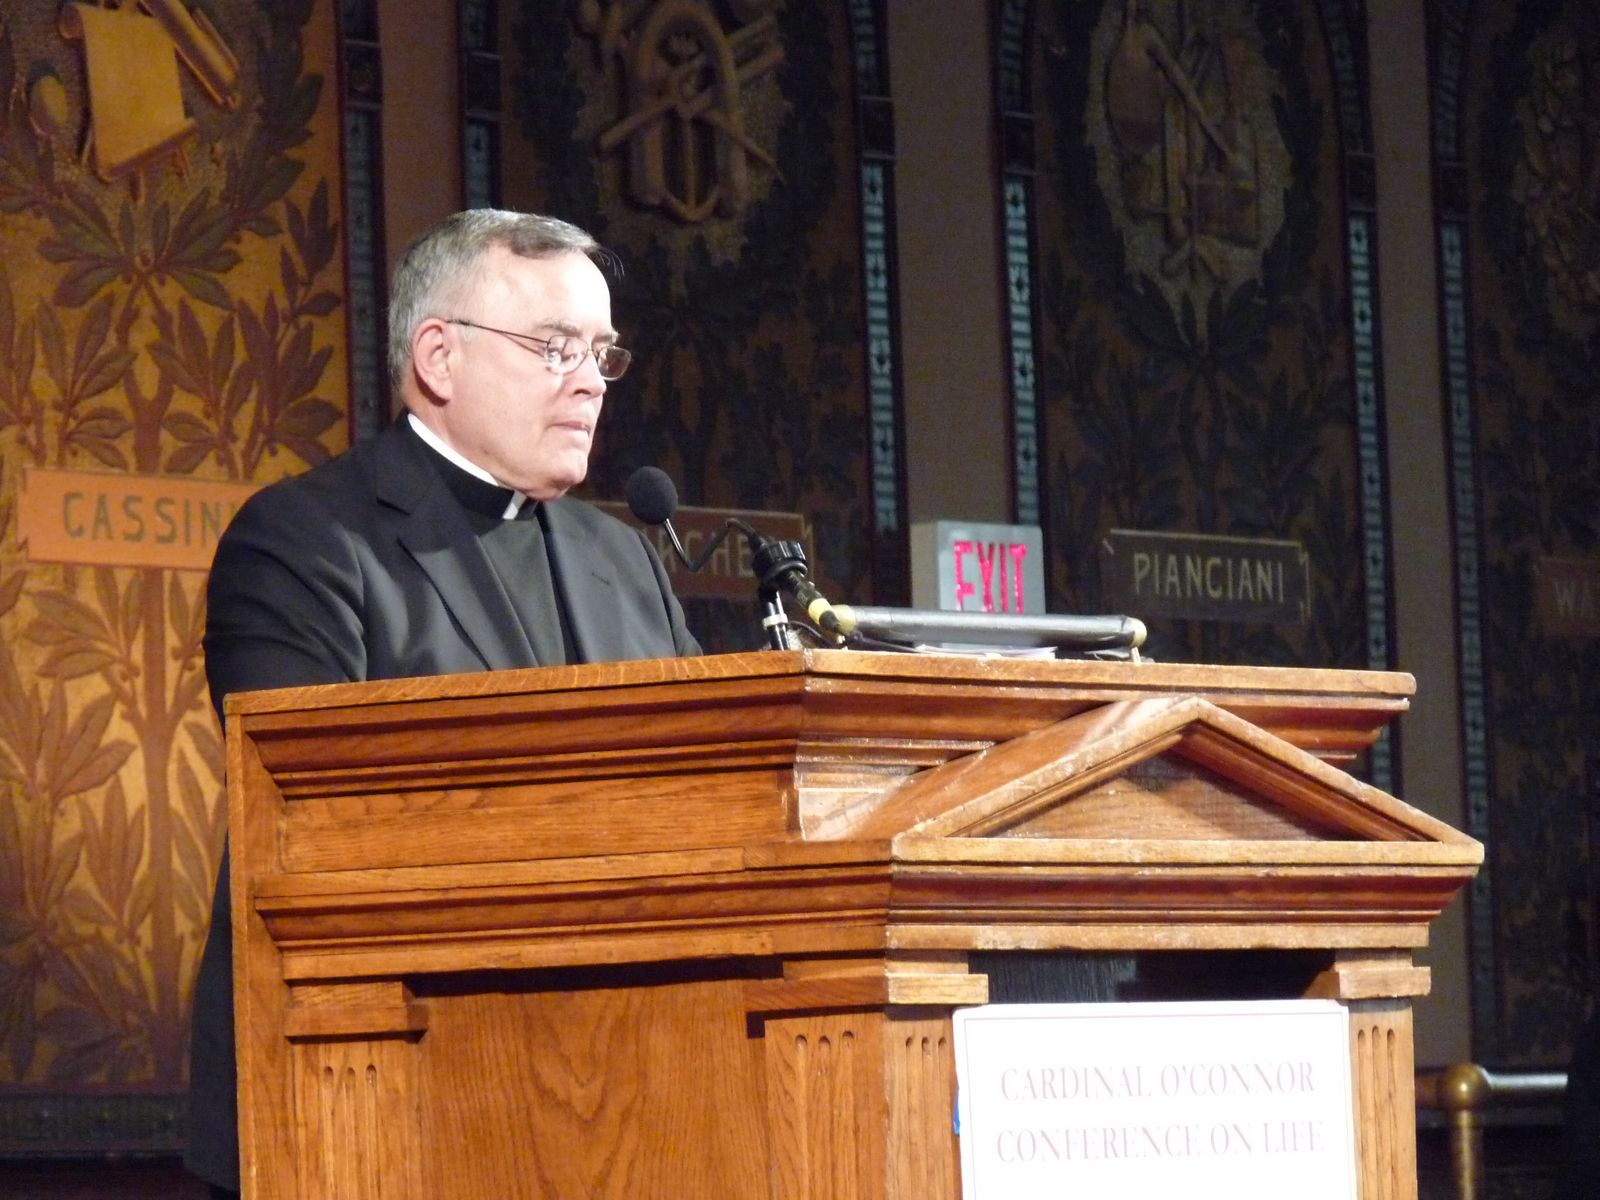 'A serious disservice': Chaput blasts Gregory for comments on Biden